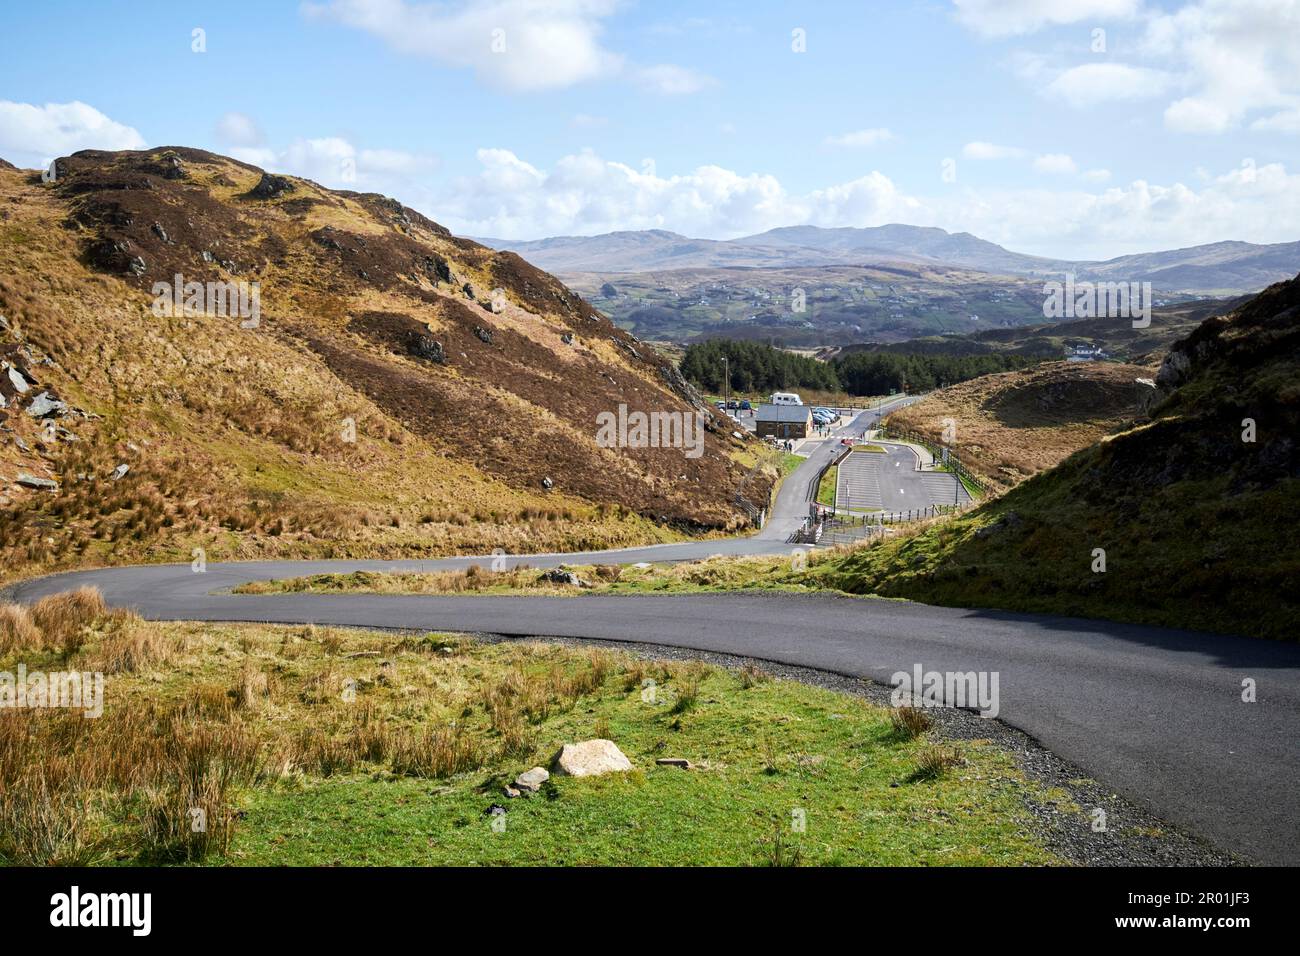 sliabh leag access road rising from the lower car park near slieve league county donegal republic of ireland Stock Photo